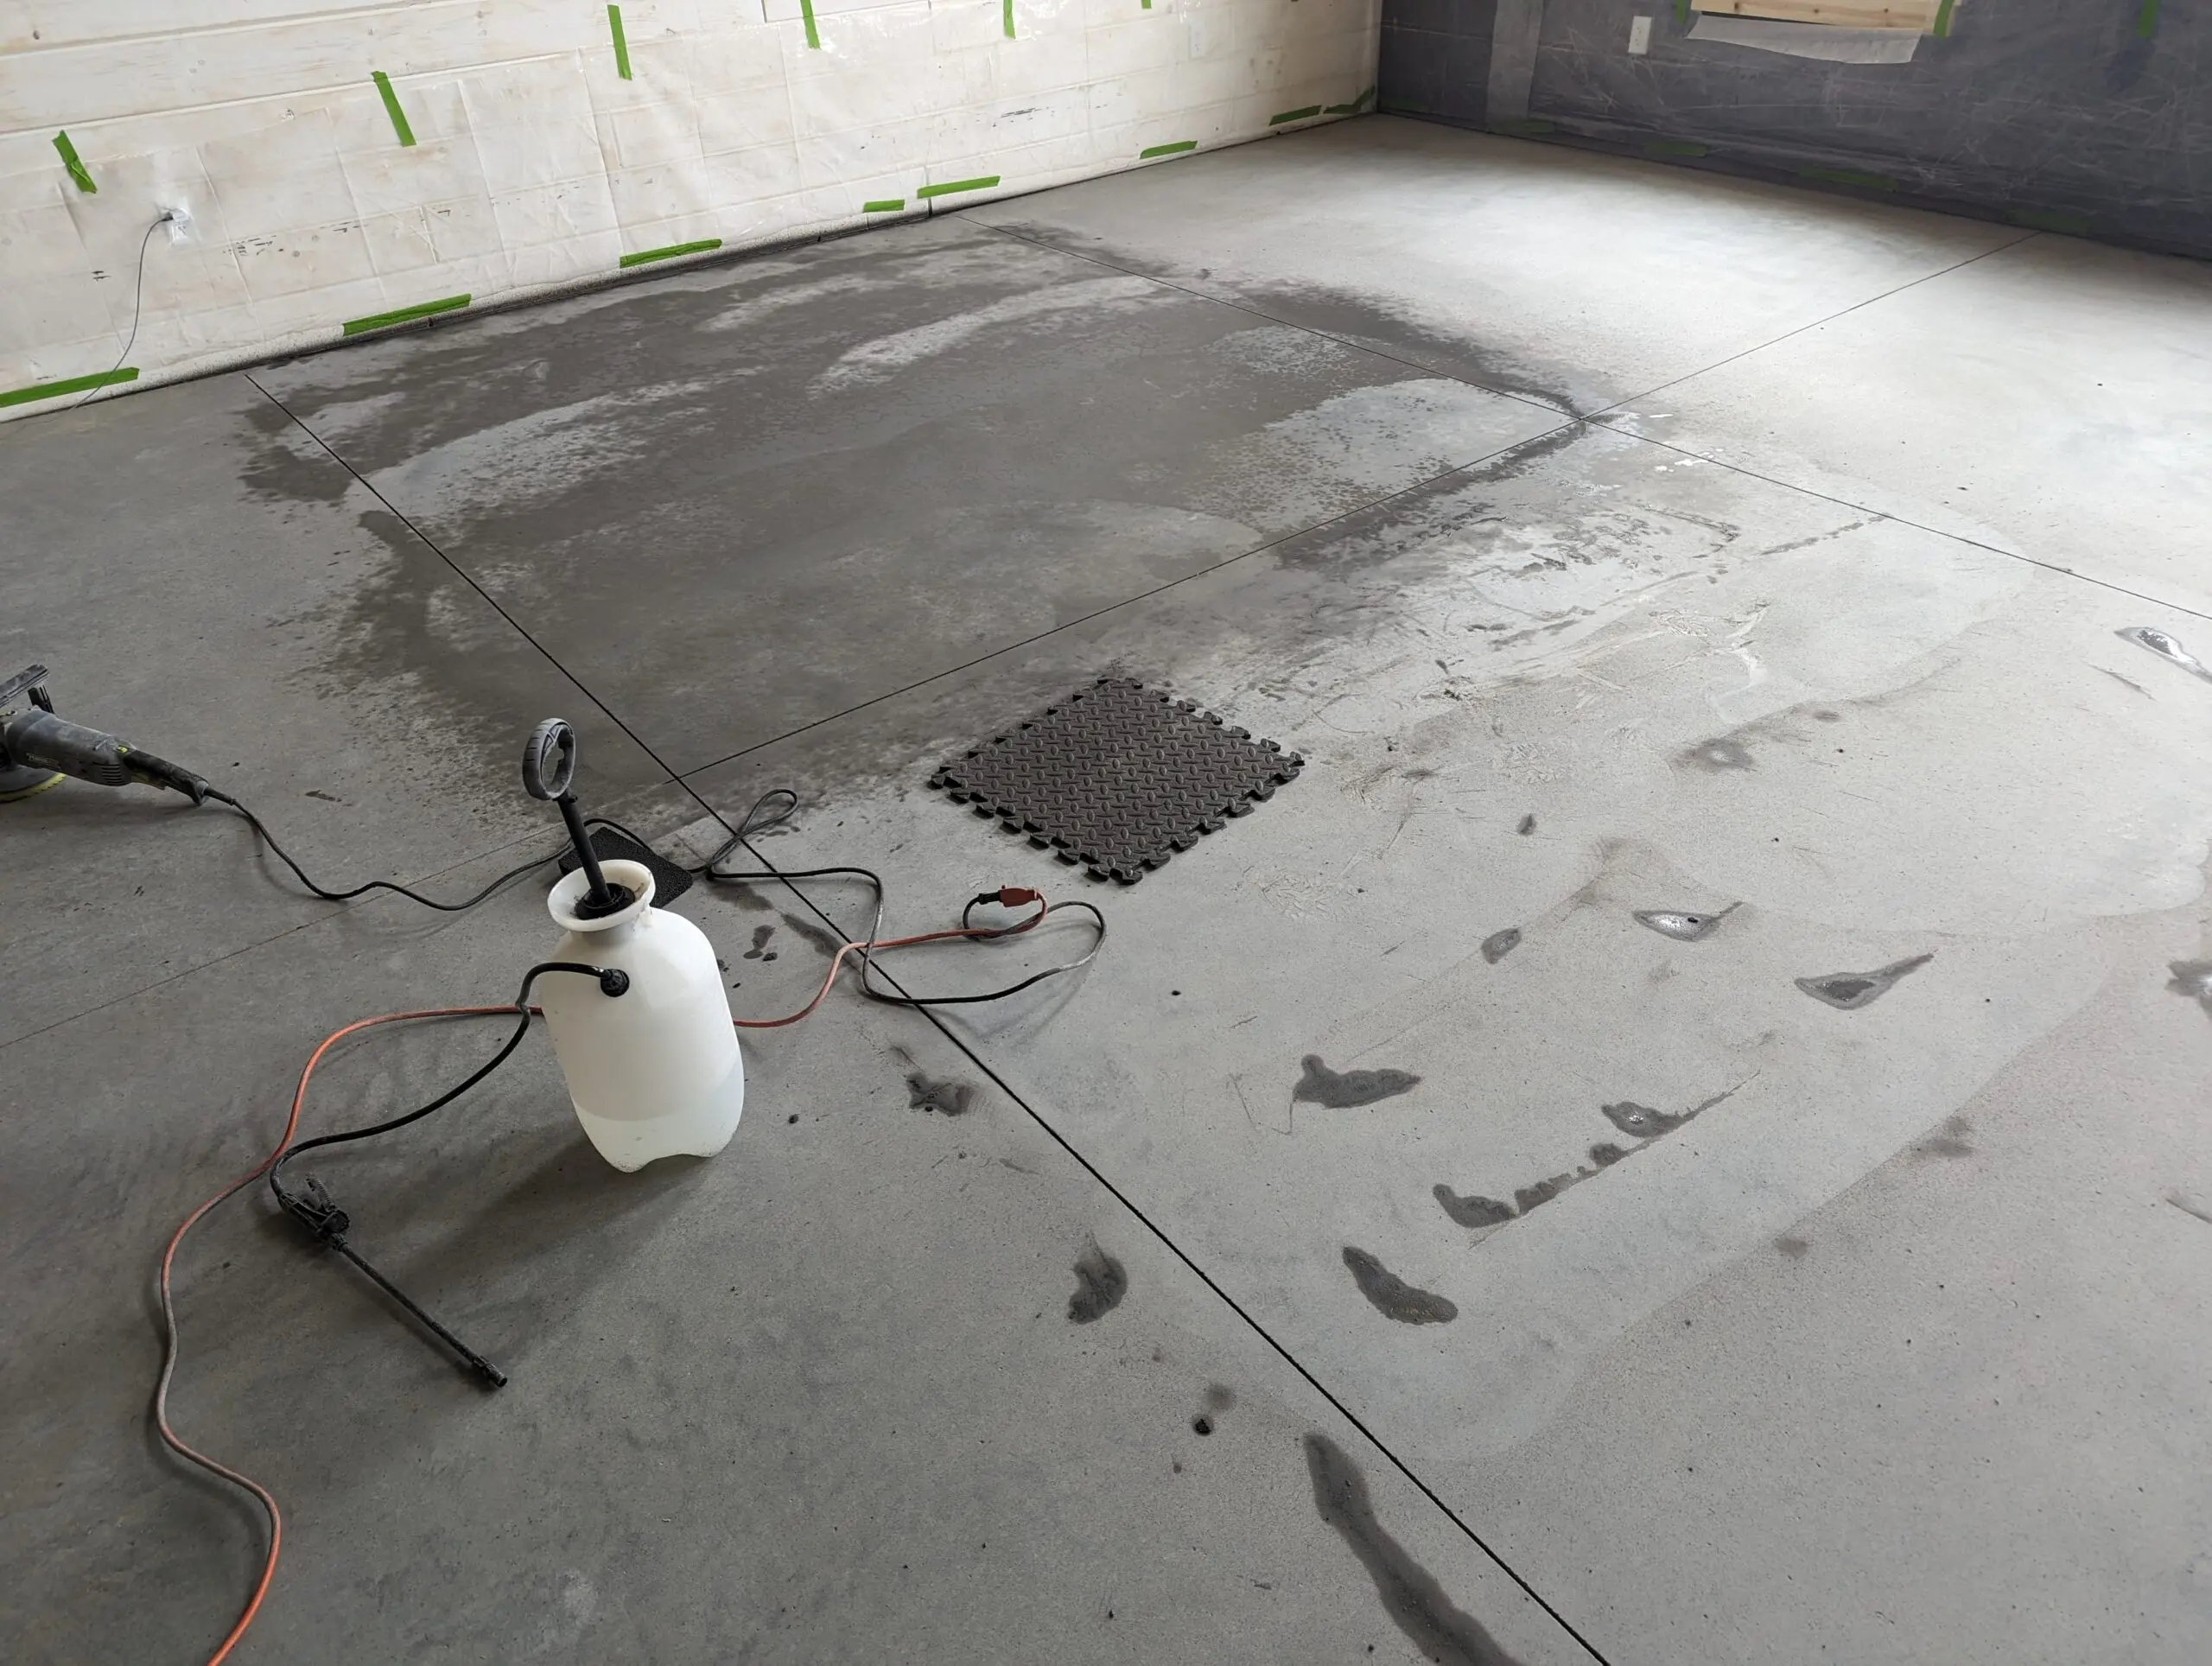 An image displaying the tools used for wet-etching the concrete floor, including a grill brick and an orbital sander, resulting in a darker and more even floor color.